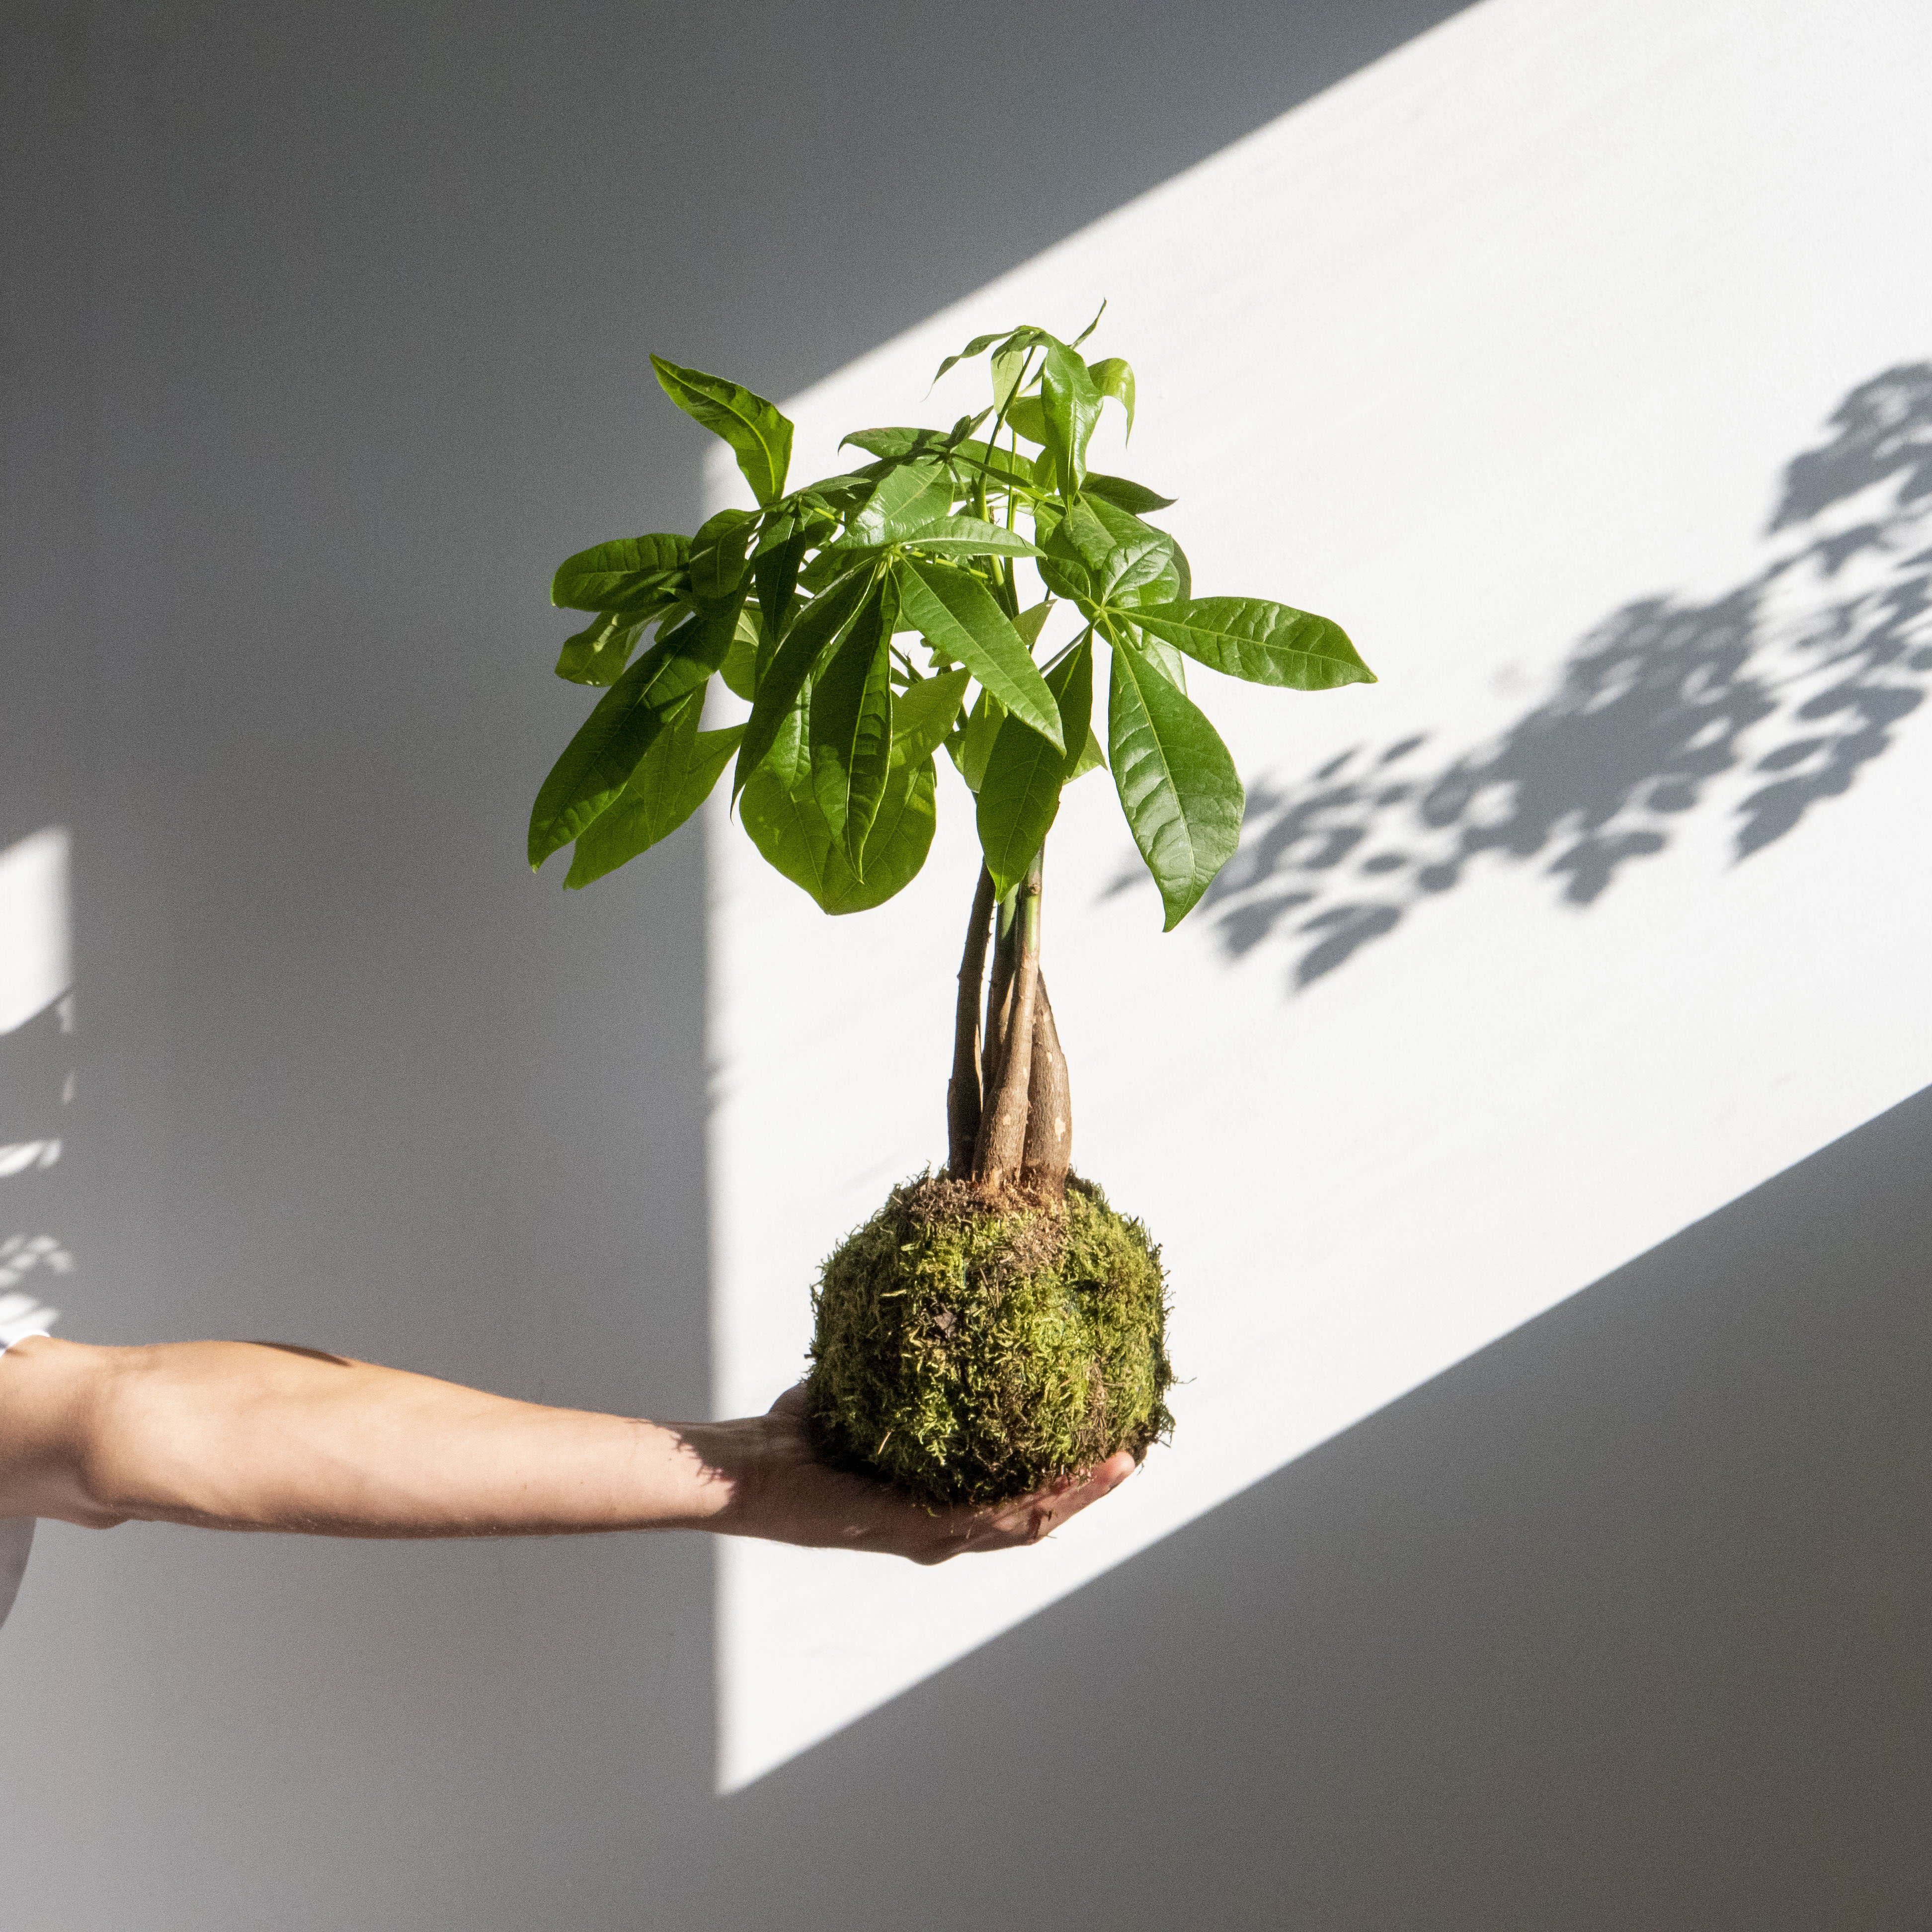 Kokedama: The art of bonsai without a container